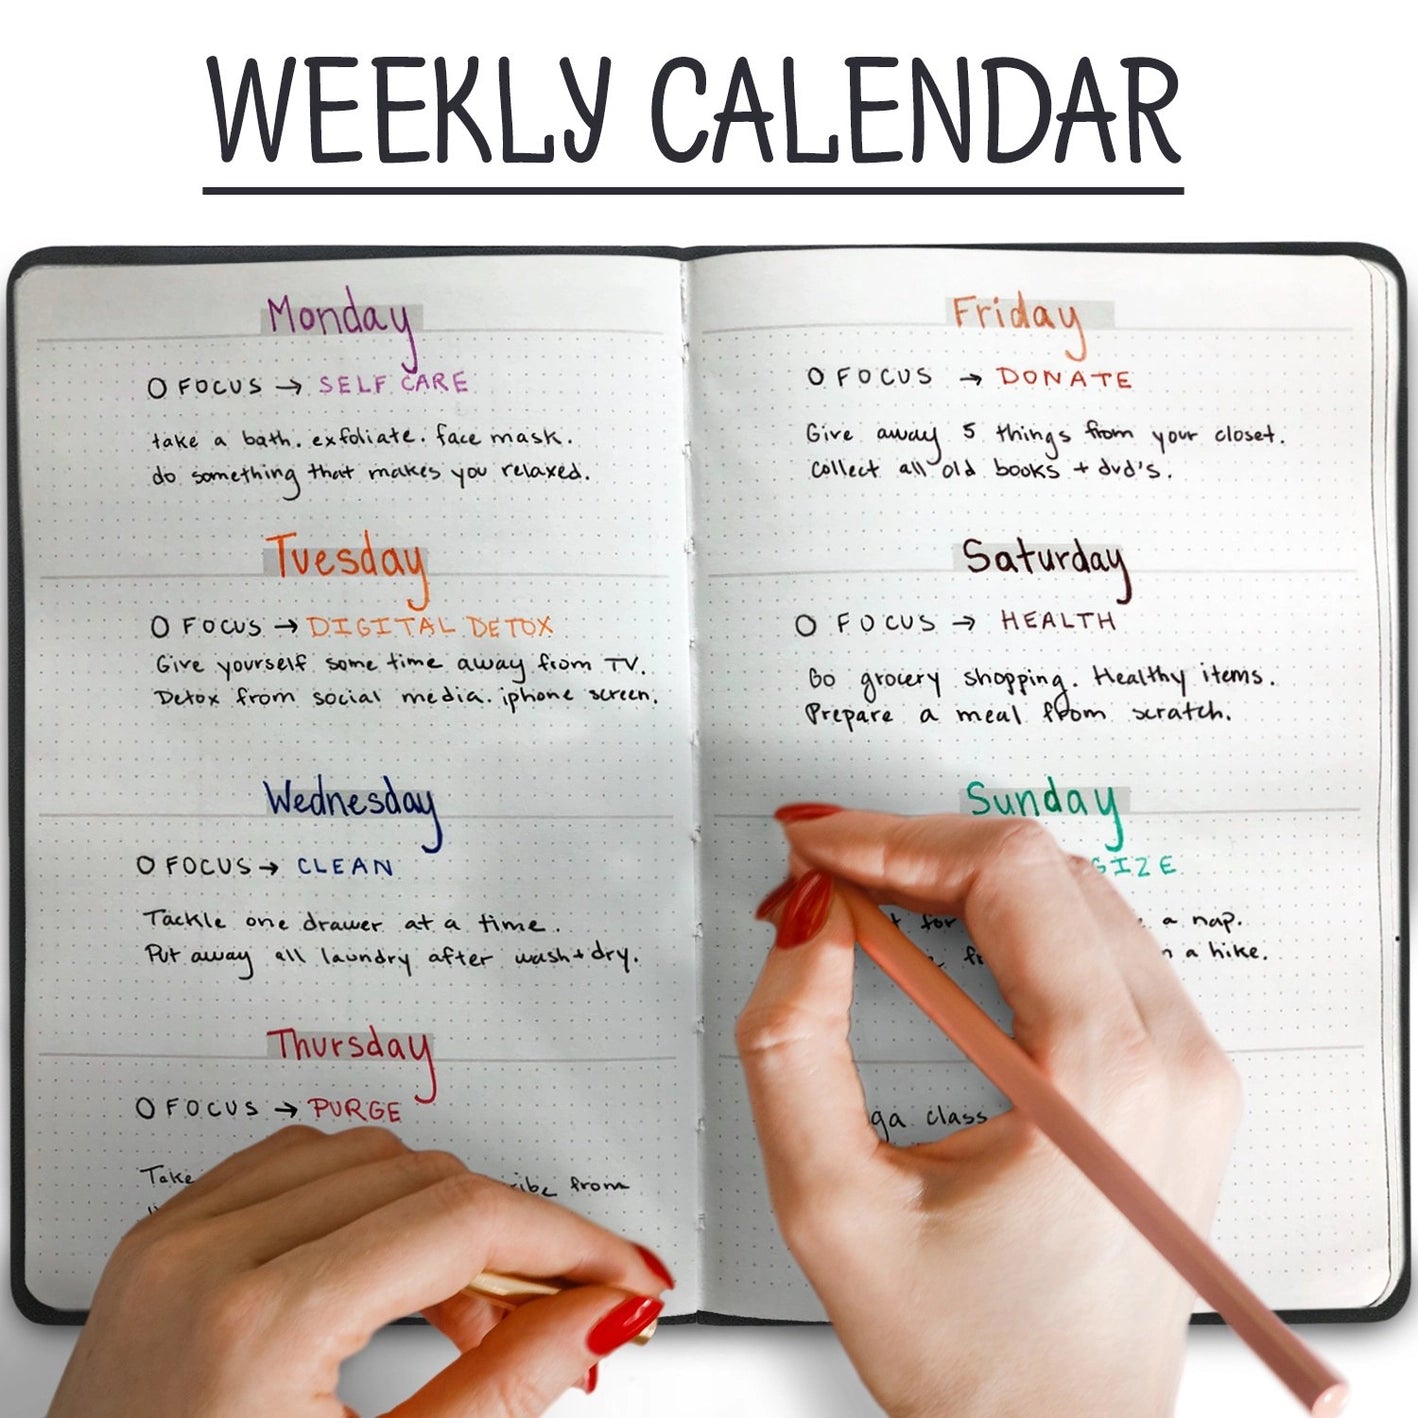 Bullet Keeper The Perfect Planner